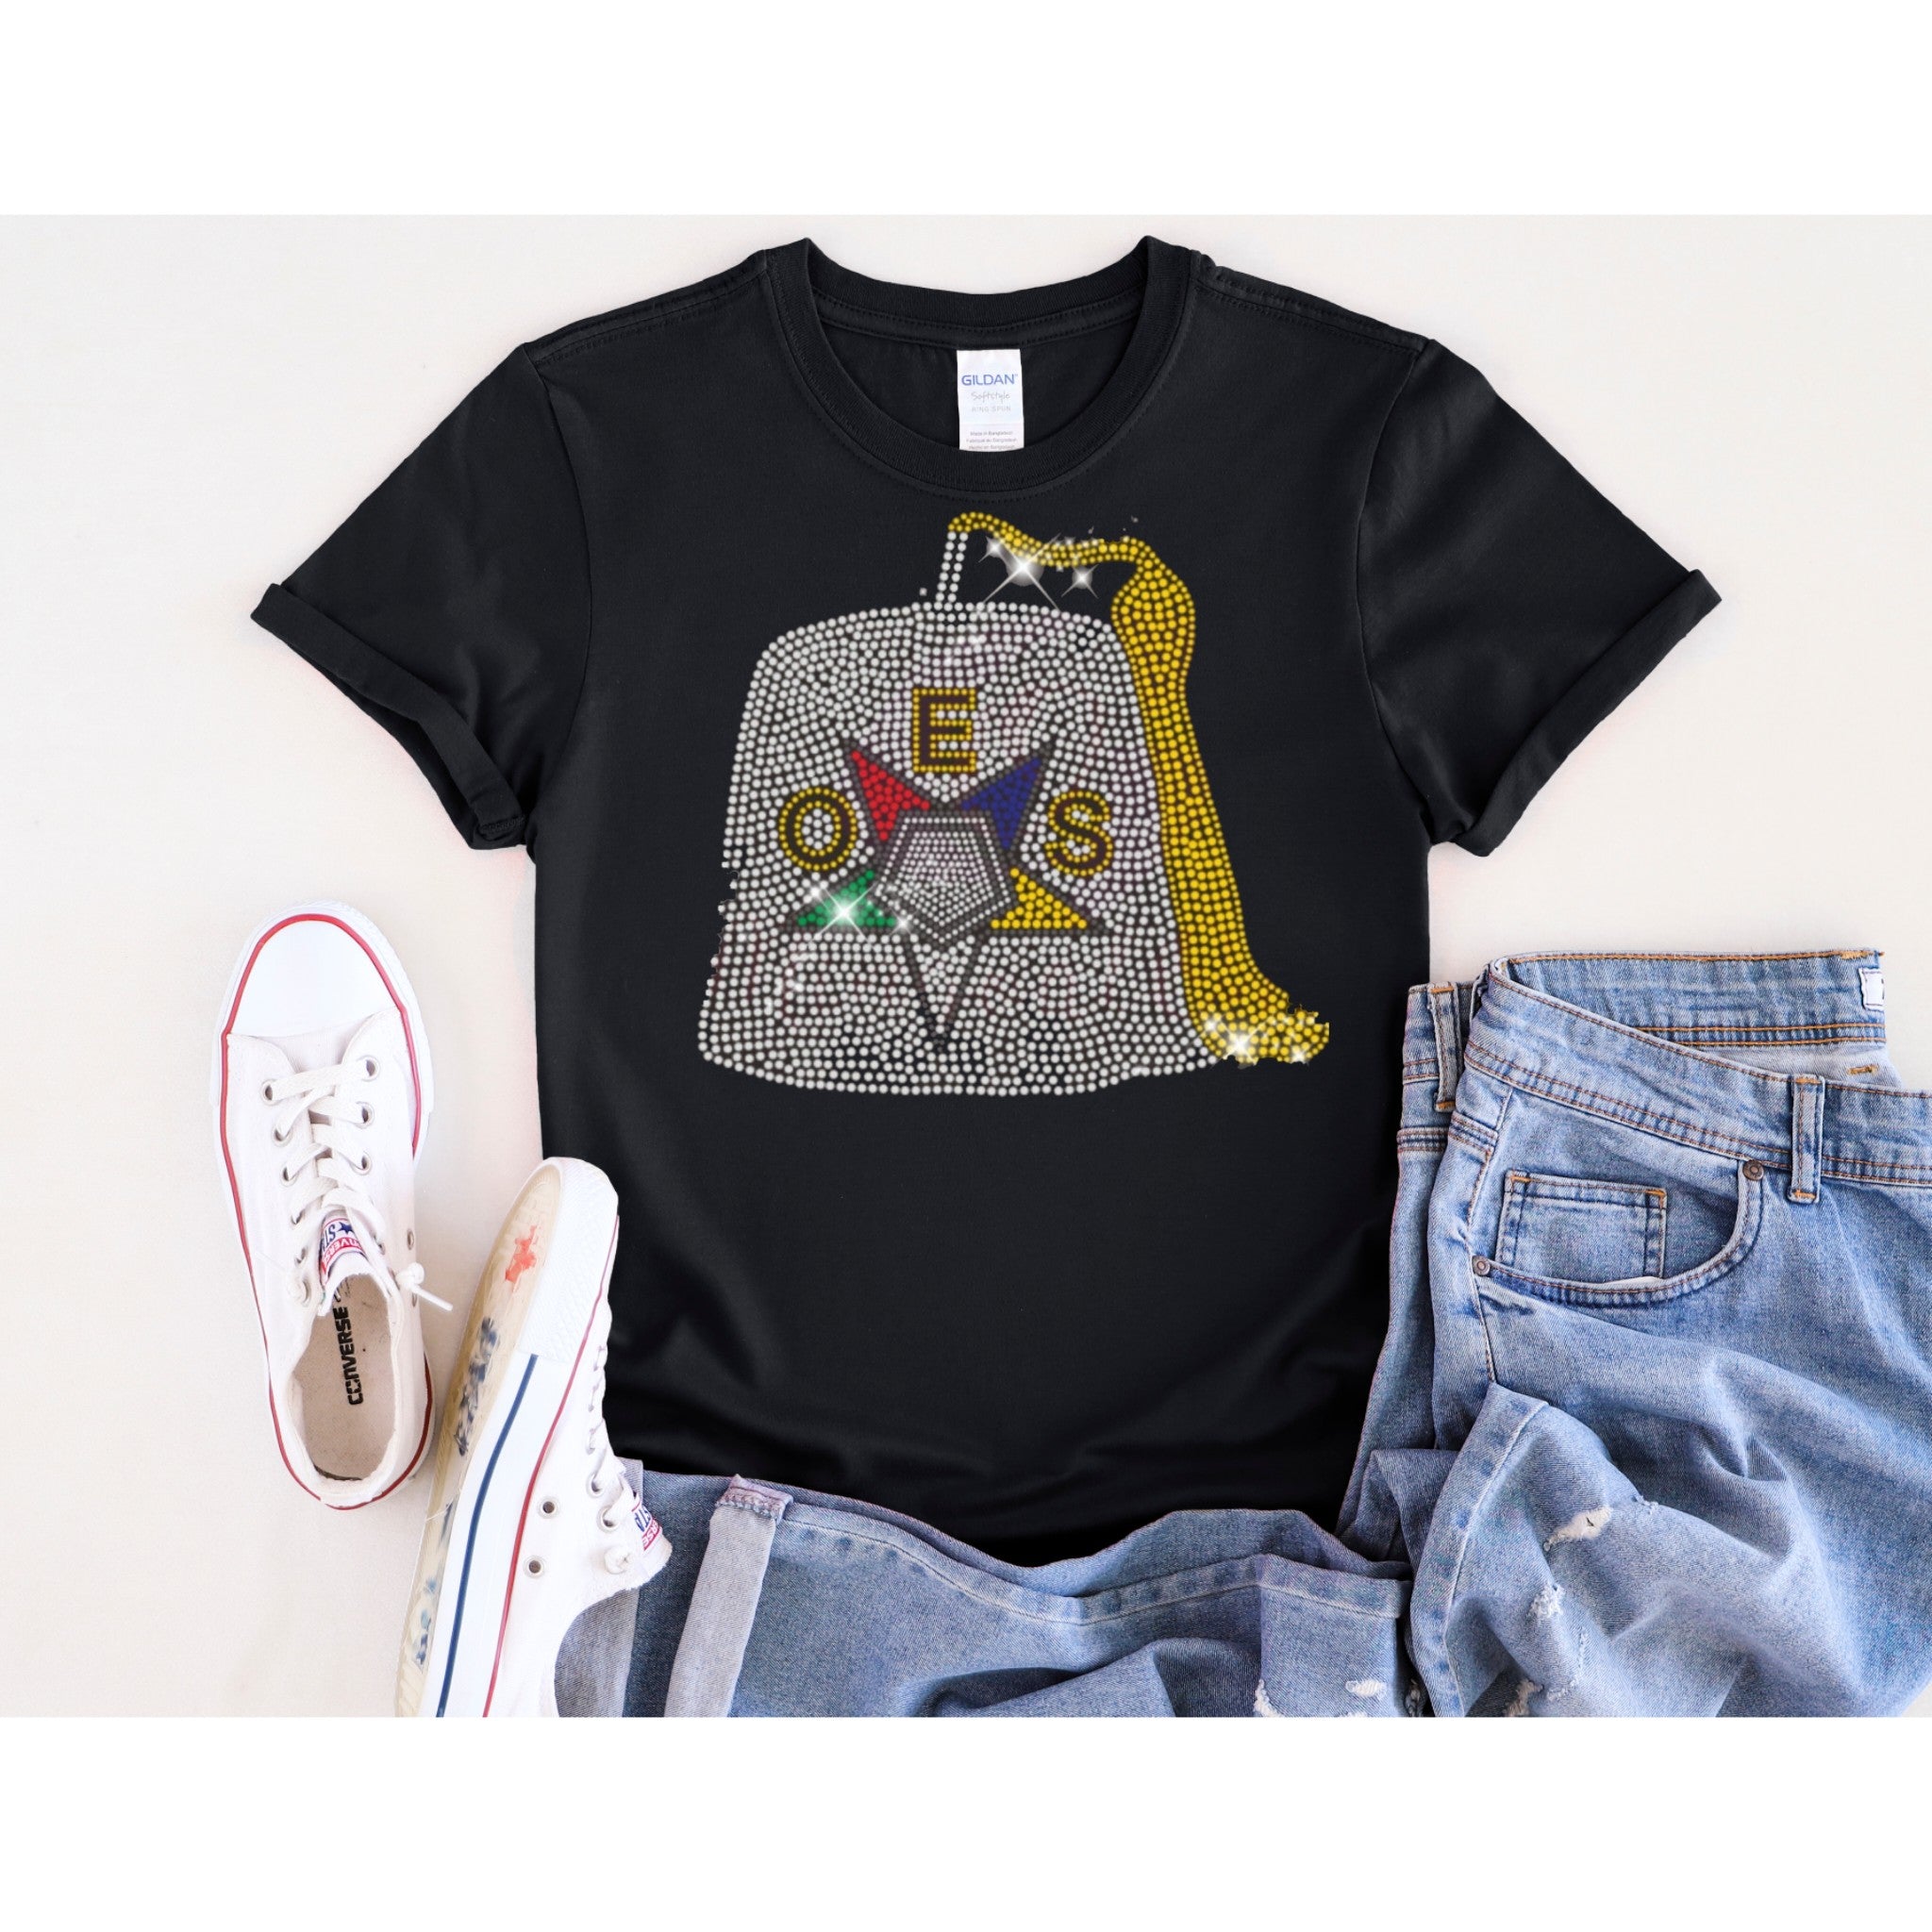 OES Fez bling tee